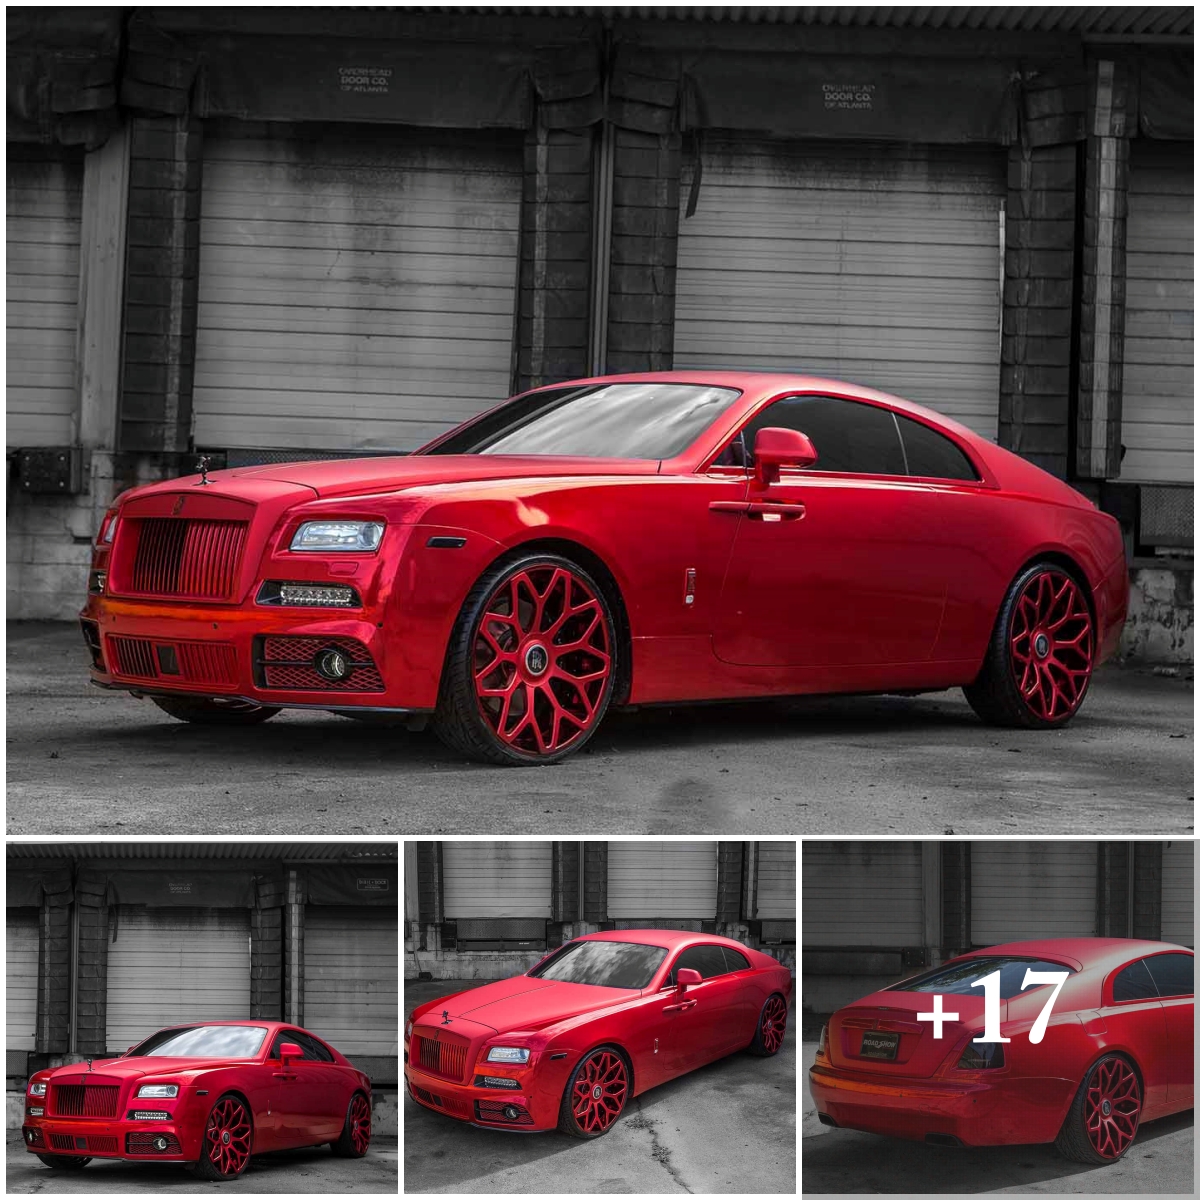 The Stunning Red Rolls-Royce Wraith on Dream-Ecl Wheels